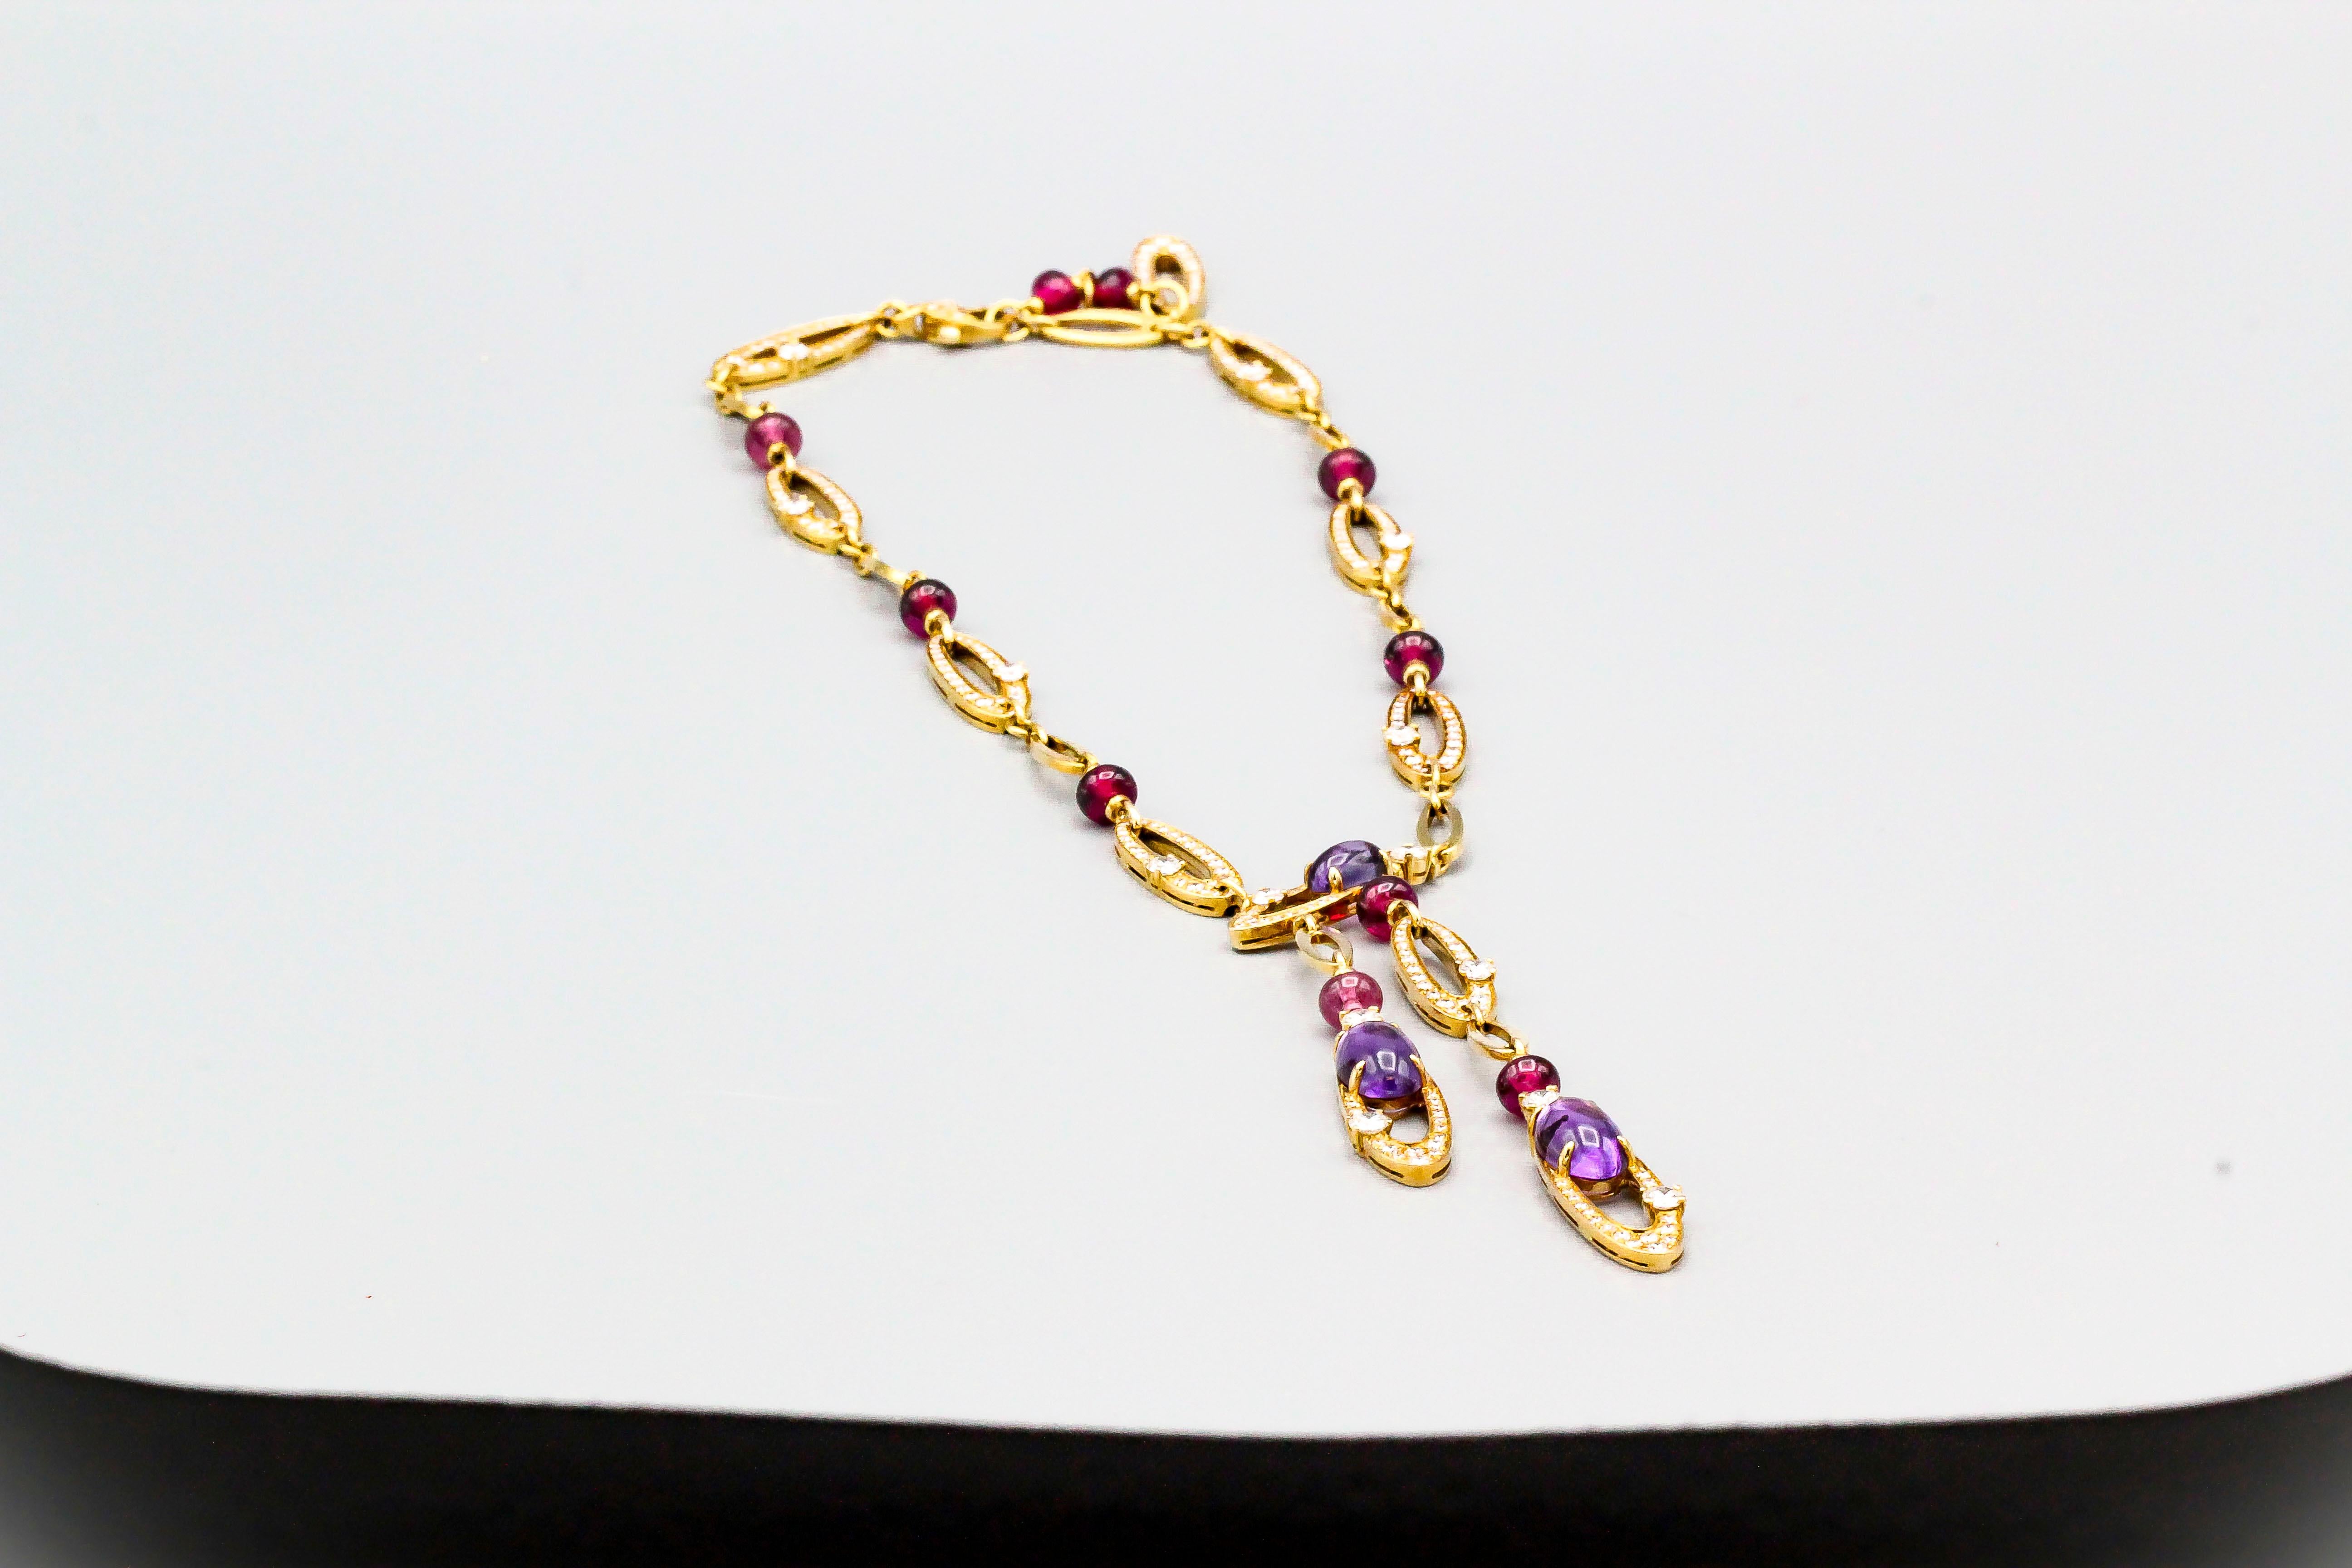 Chic contemporary amethyst, rubellite, diamond and 18K yellow gold necklace from the 